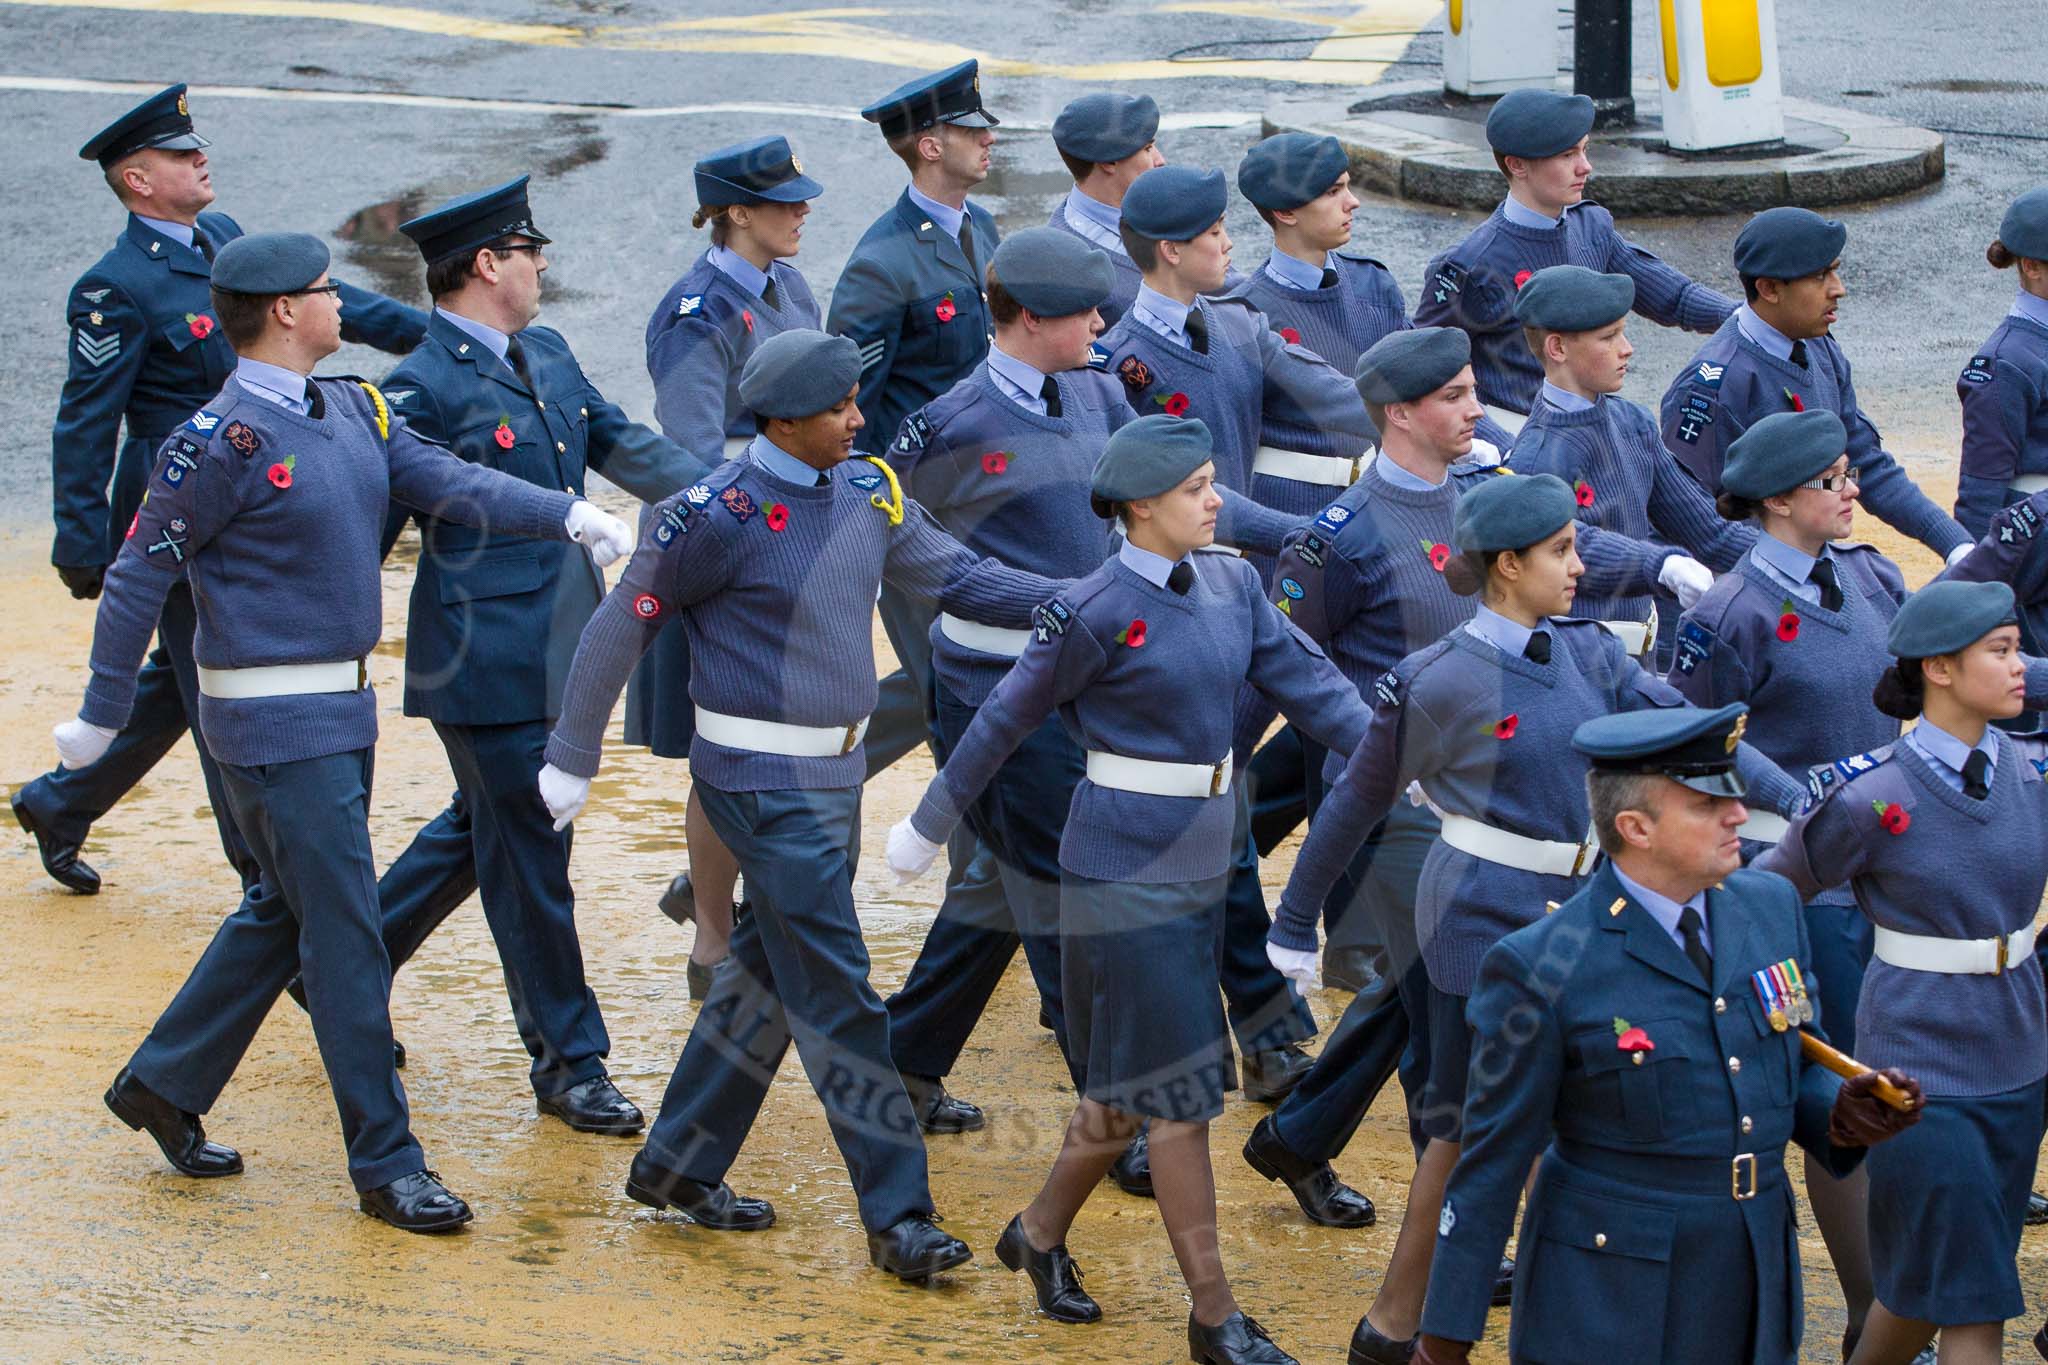 Lord Mayor's Show 2012: Entry 24 - Air Training Corps, the Air Cadets is the world's largest youth air training organisation..
Press stand opposite Mansion House, City of London,
London,
Greater London,
United Kingdom,
on 10 November 2012 at 11:11, image #418